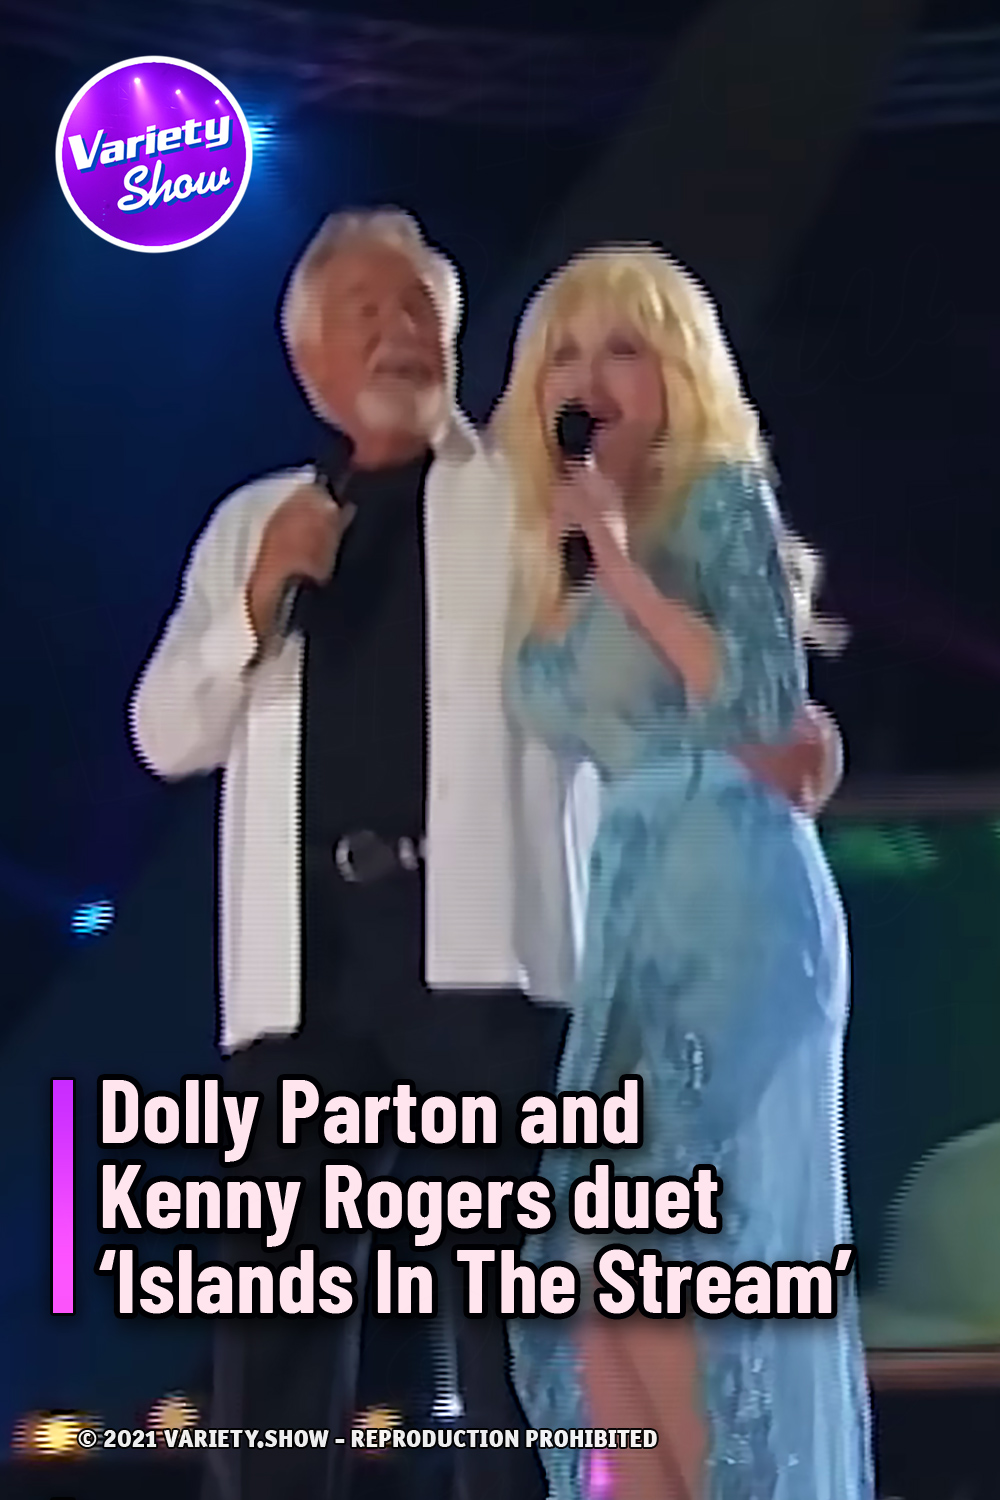 Dolly Parton and Kenny Rogers duet ‘Islands In The Stream’